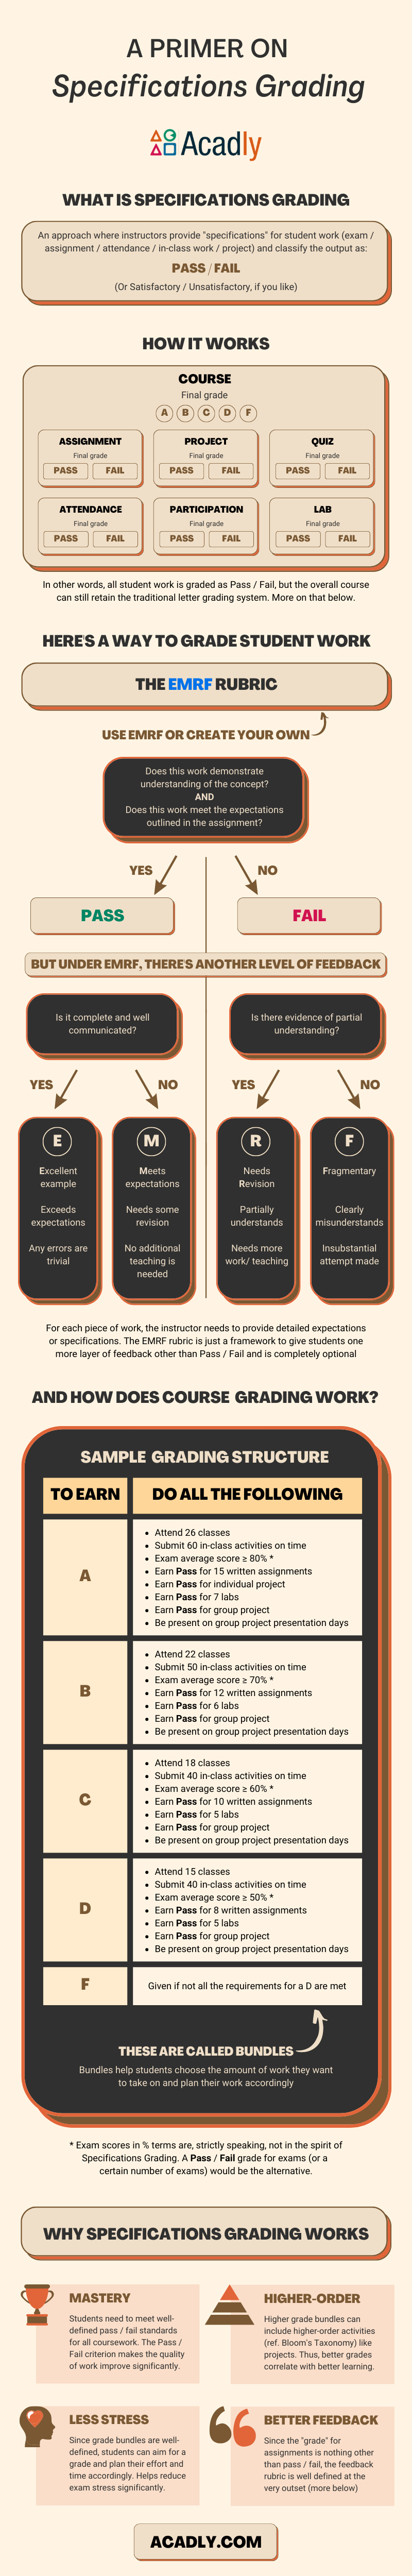 Specifications Grading, The Complete Infographic Guide